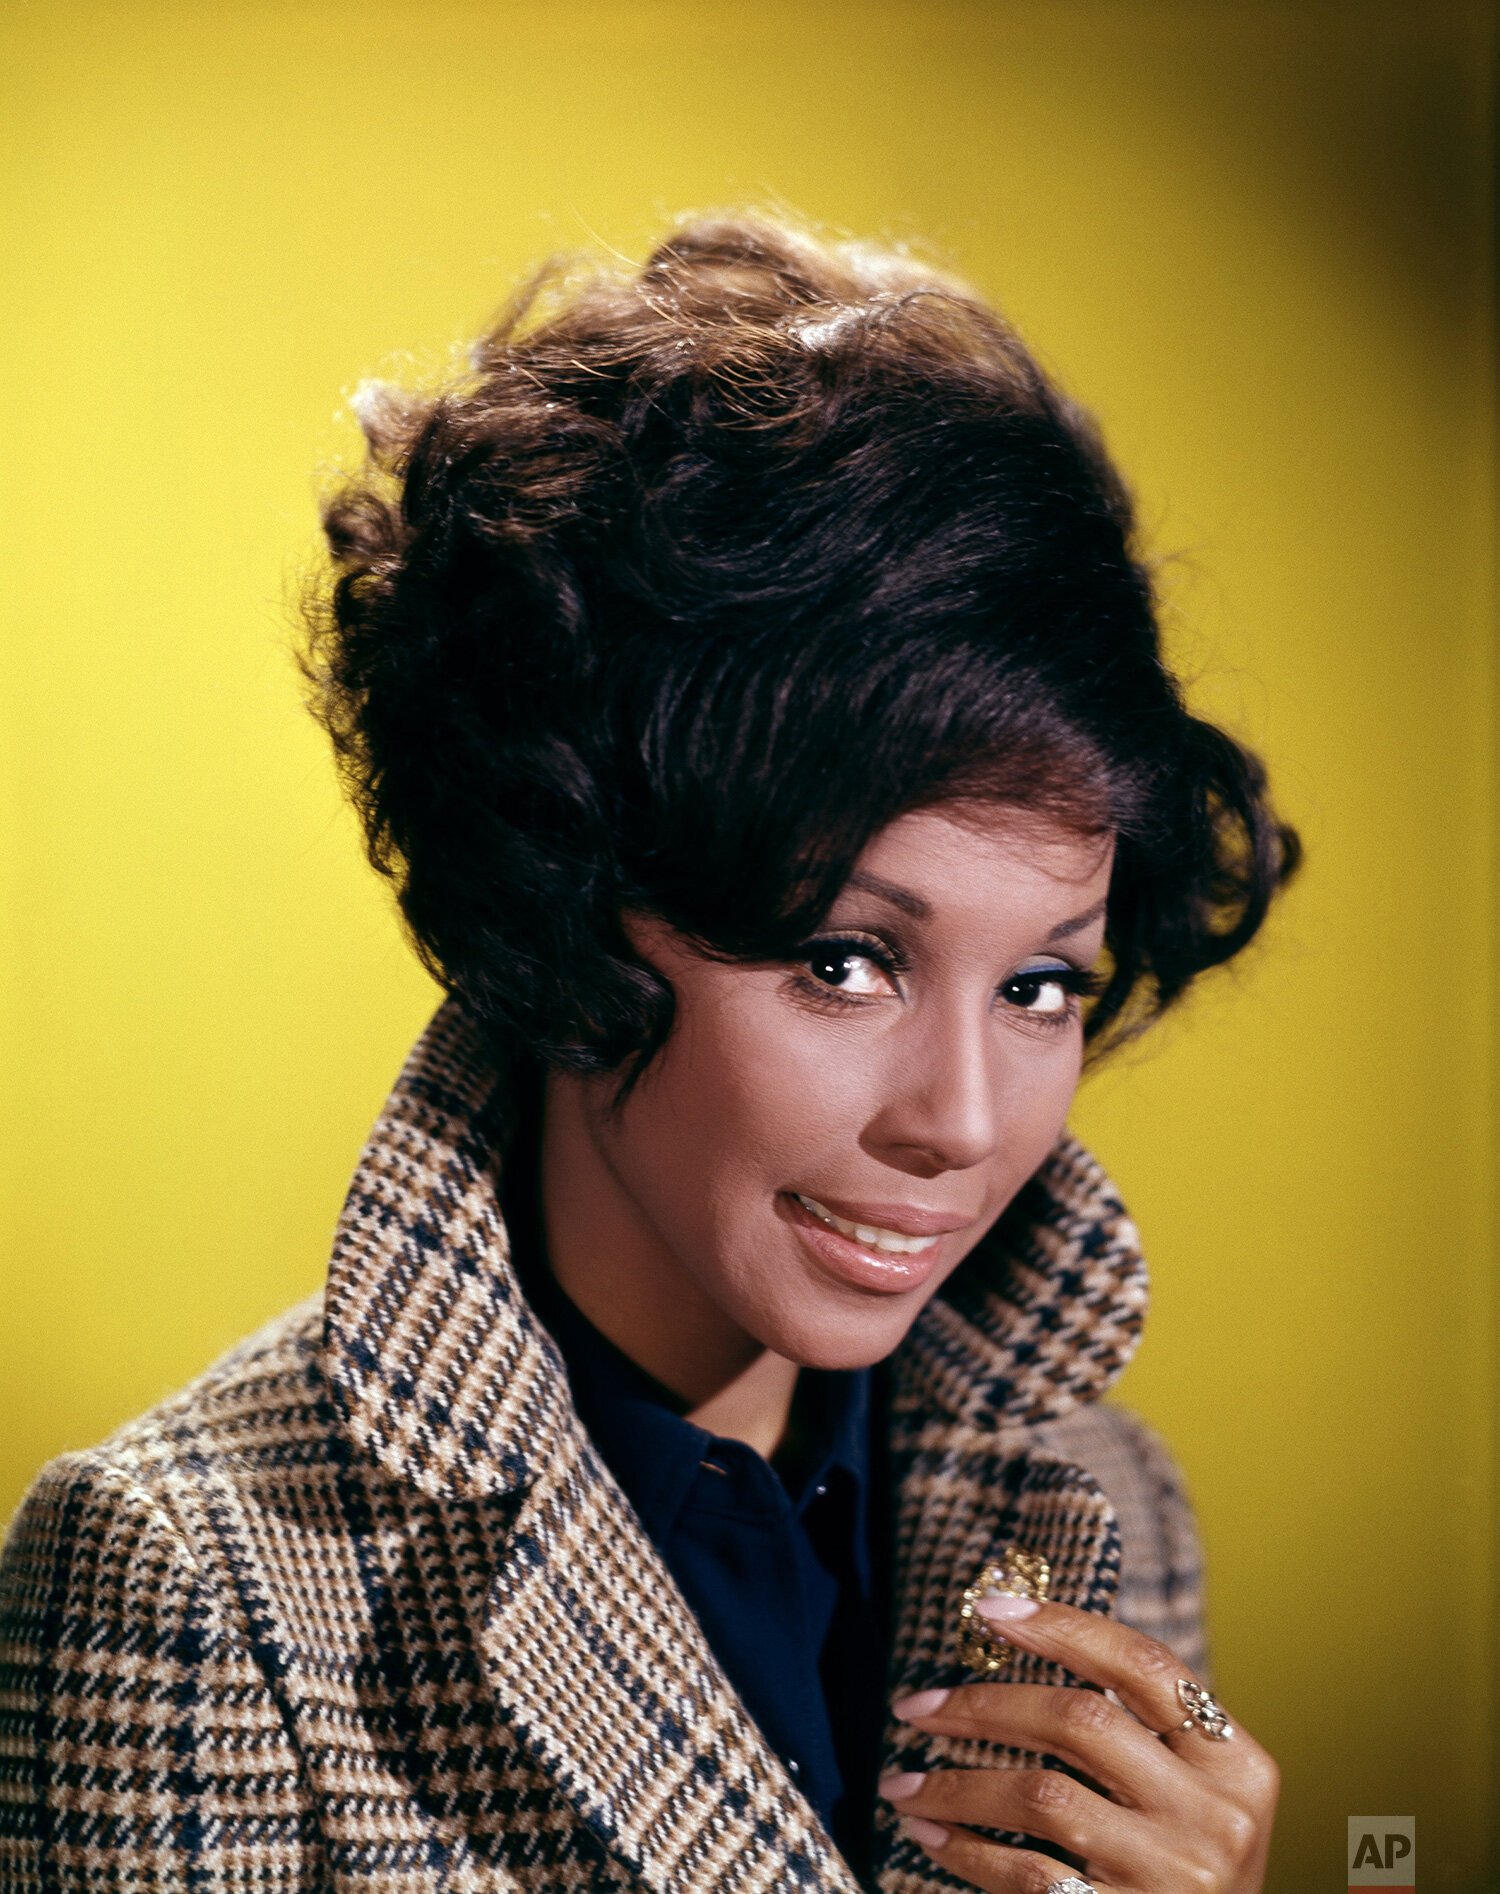  Singer and actress Diahann Carroll is shown in an undated photo. (AP Photo/Jean-Jacques Levy) 